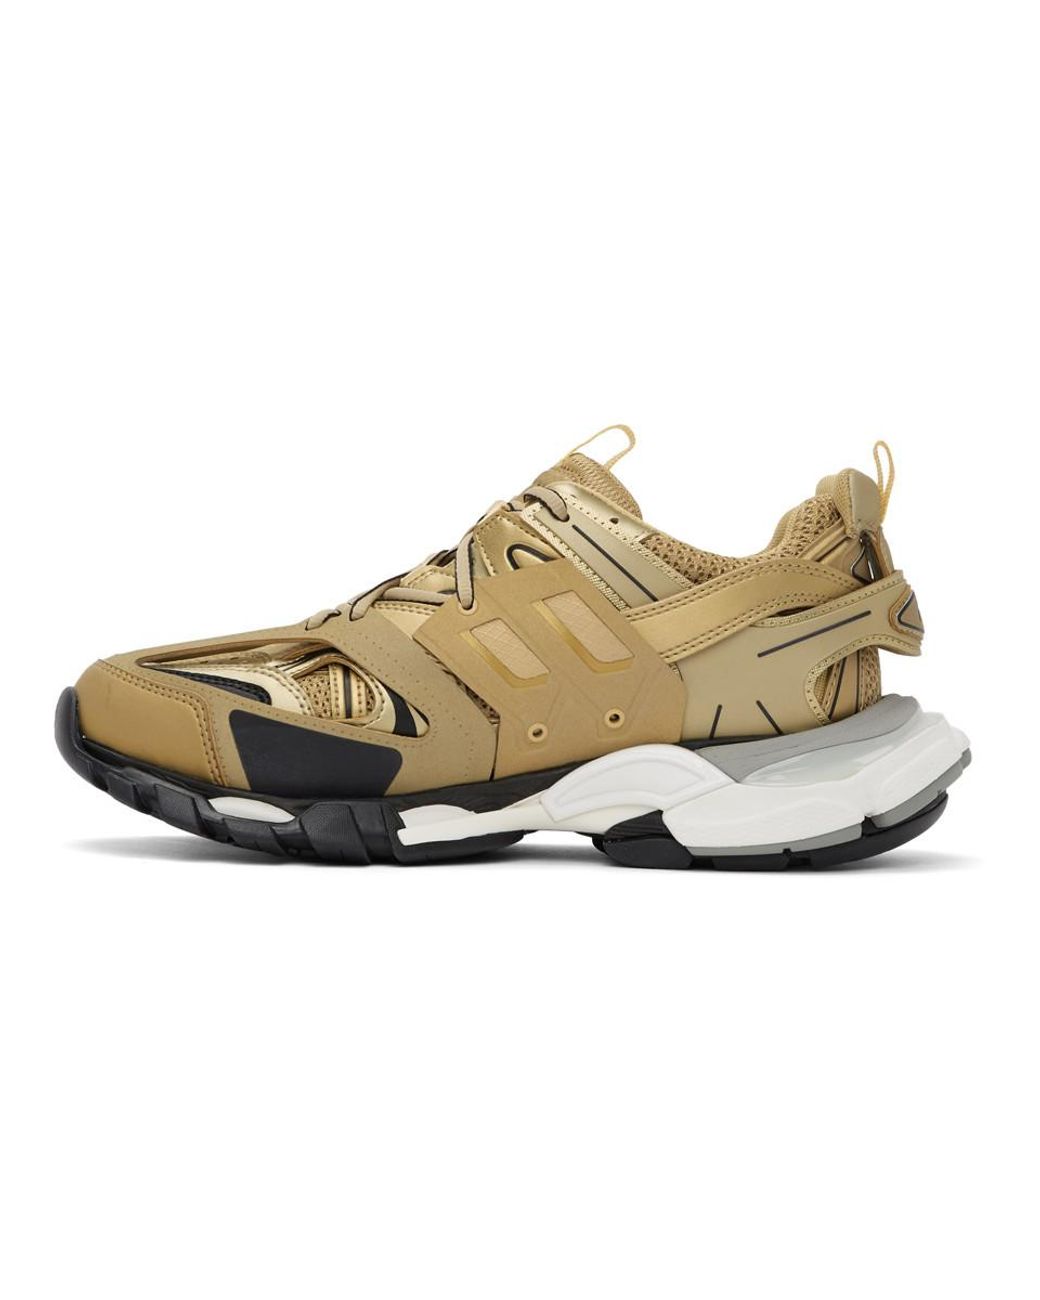 Balenciaga Rubber Track Trainers in Gold (Metallic) for Men | Lyst